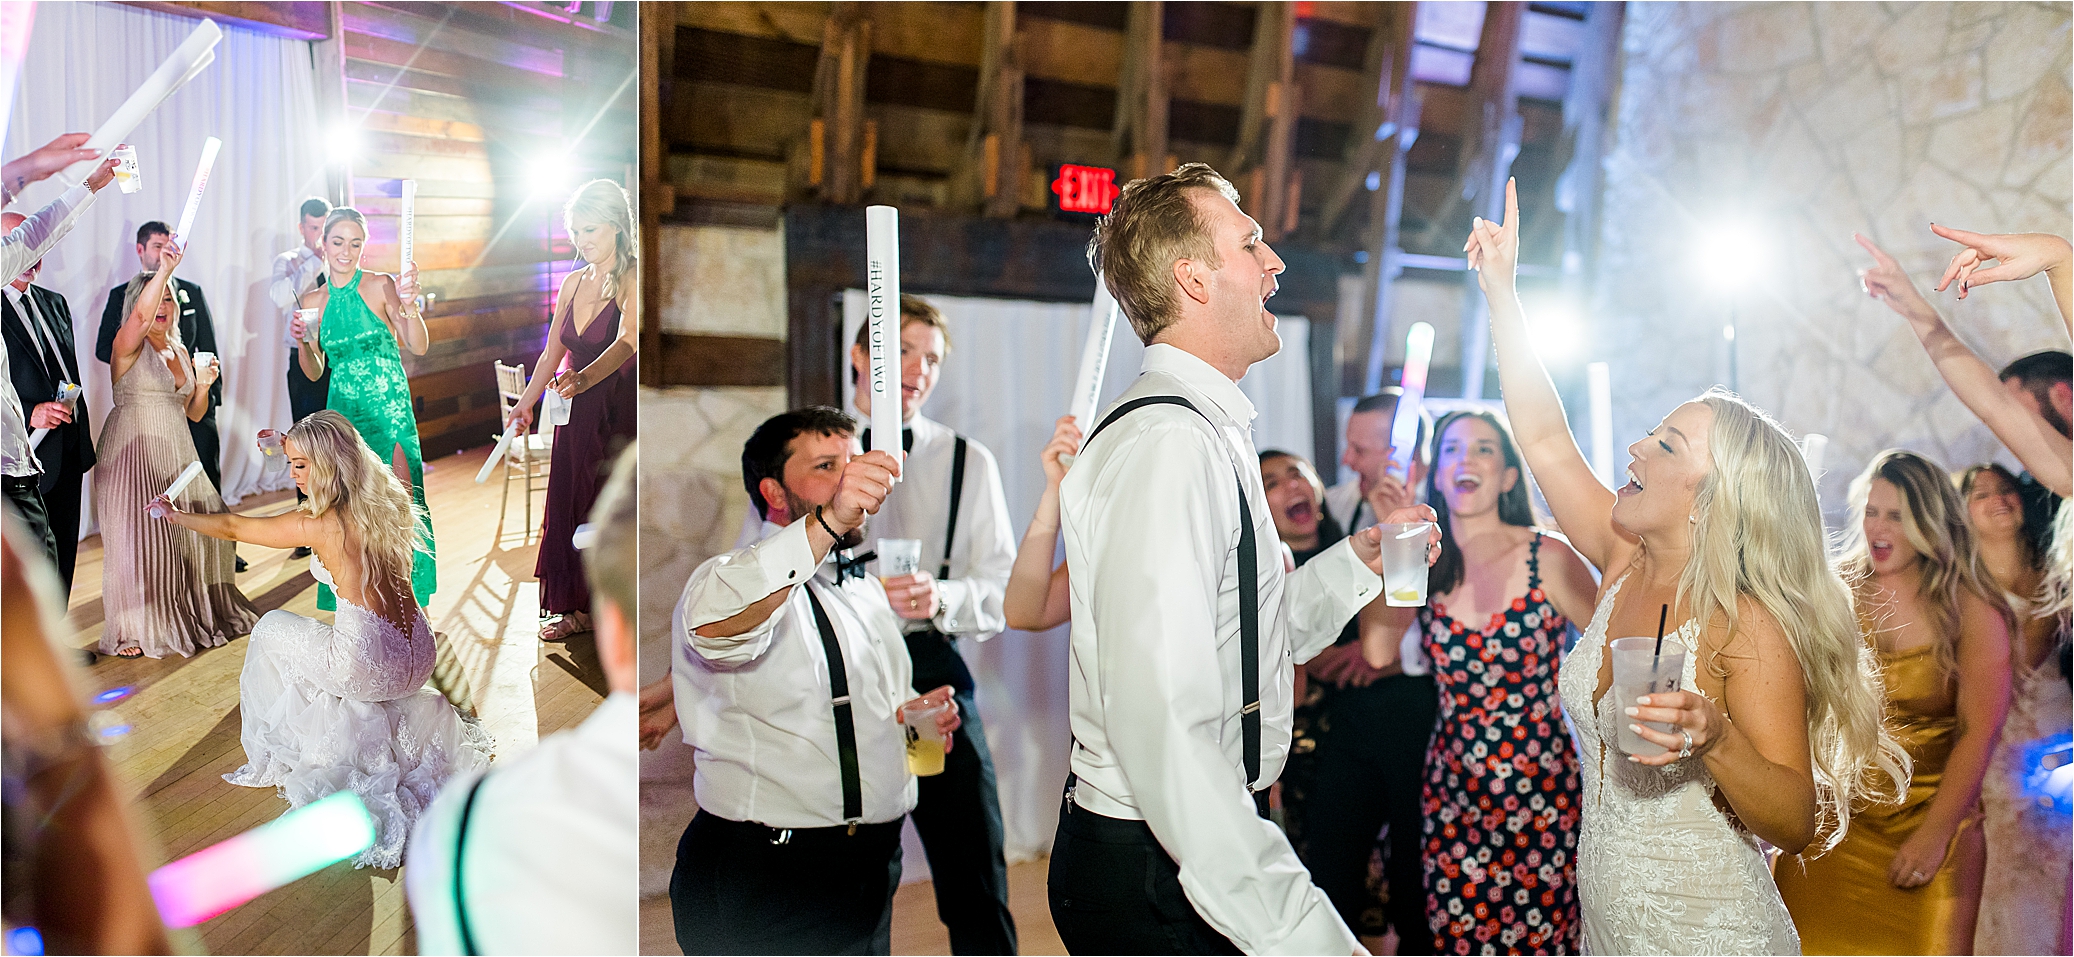 A bride and groom dance and sing together at their wedding reception at Brodie Homestead in Austin, Texas